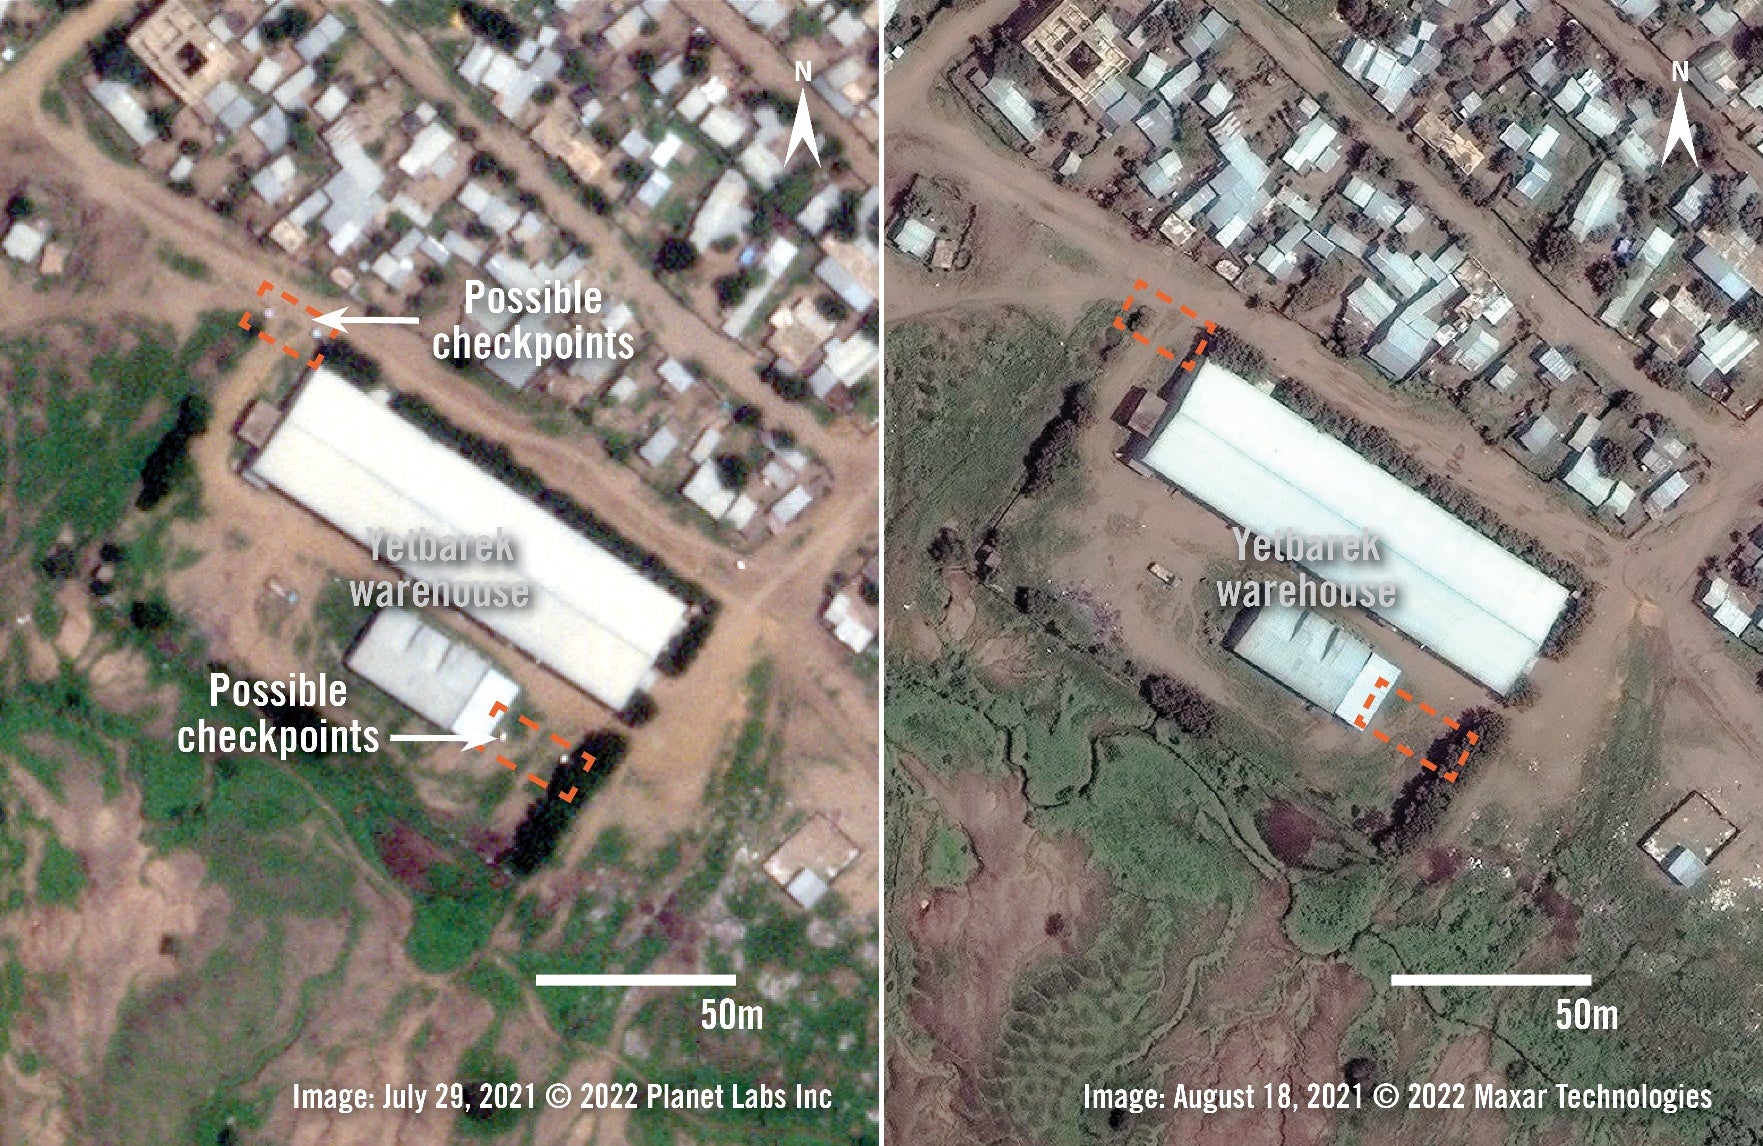 Four small white objects are visible at the entrance and back area of the Yetbarek Warehouse in imagery from July 29, 2021. The objects are also visible on July 30 and August 2 (not shown) suggesting they could be checkpoints for movement into and around the warehouse area. The objects are not visible in imagery from August 18, 2021.